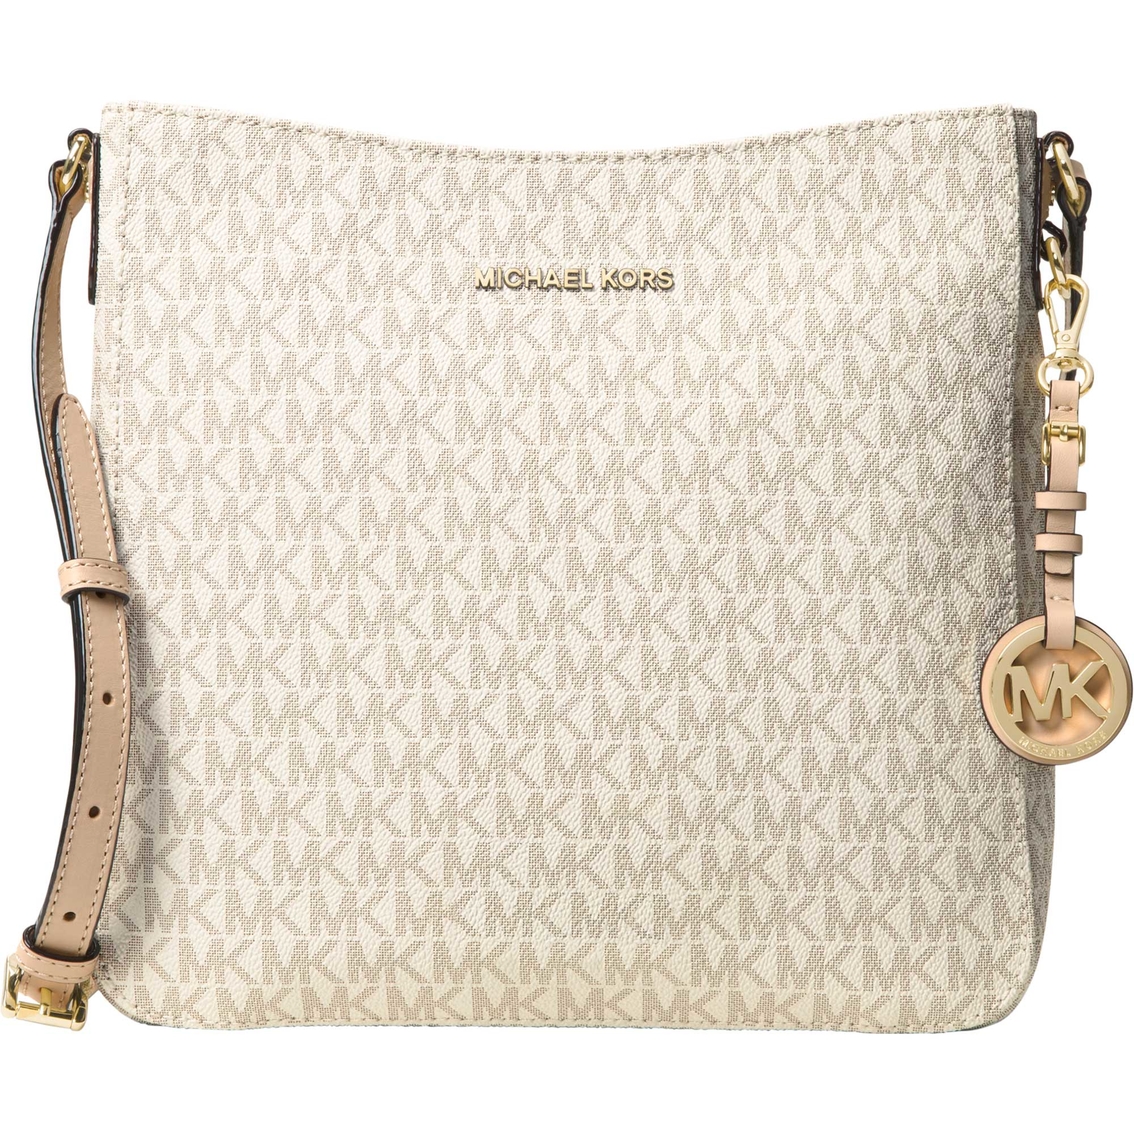 michael kors concealed carry purse